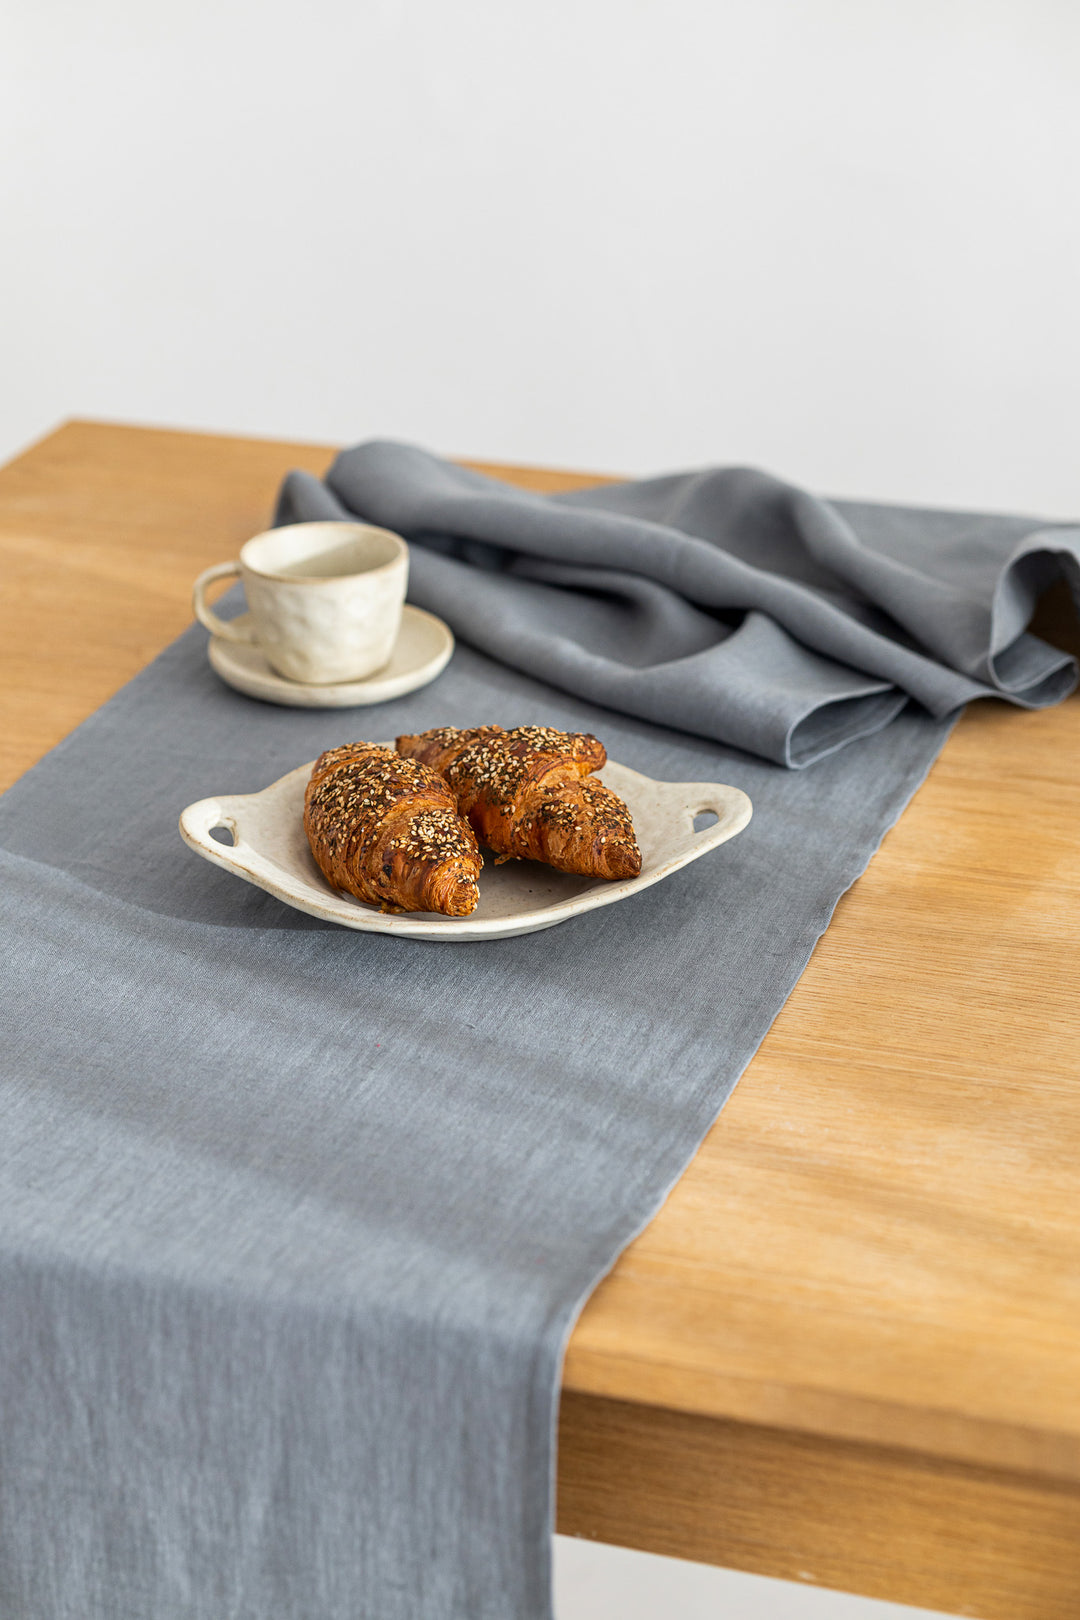 Linen Table Runner On Table In Grey Color 2 - Daily Linen